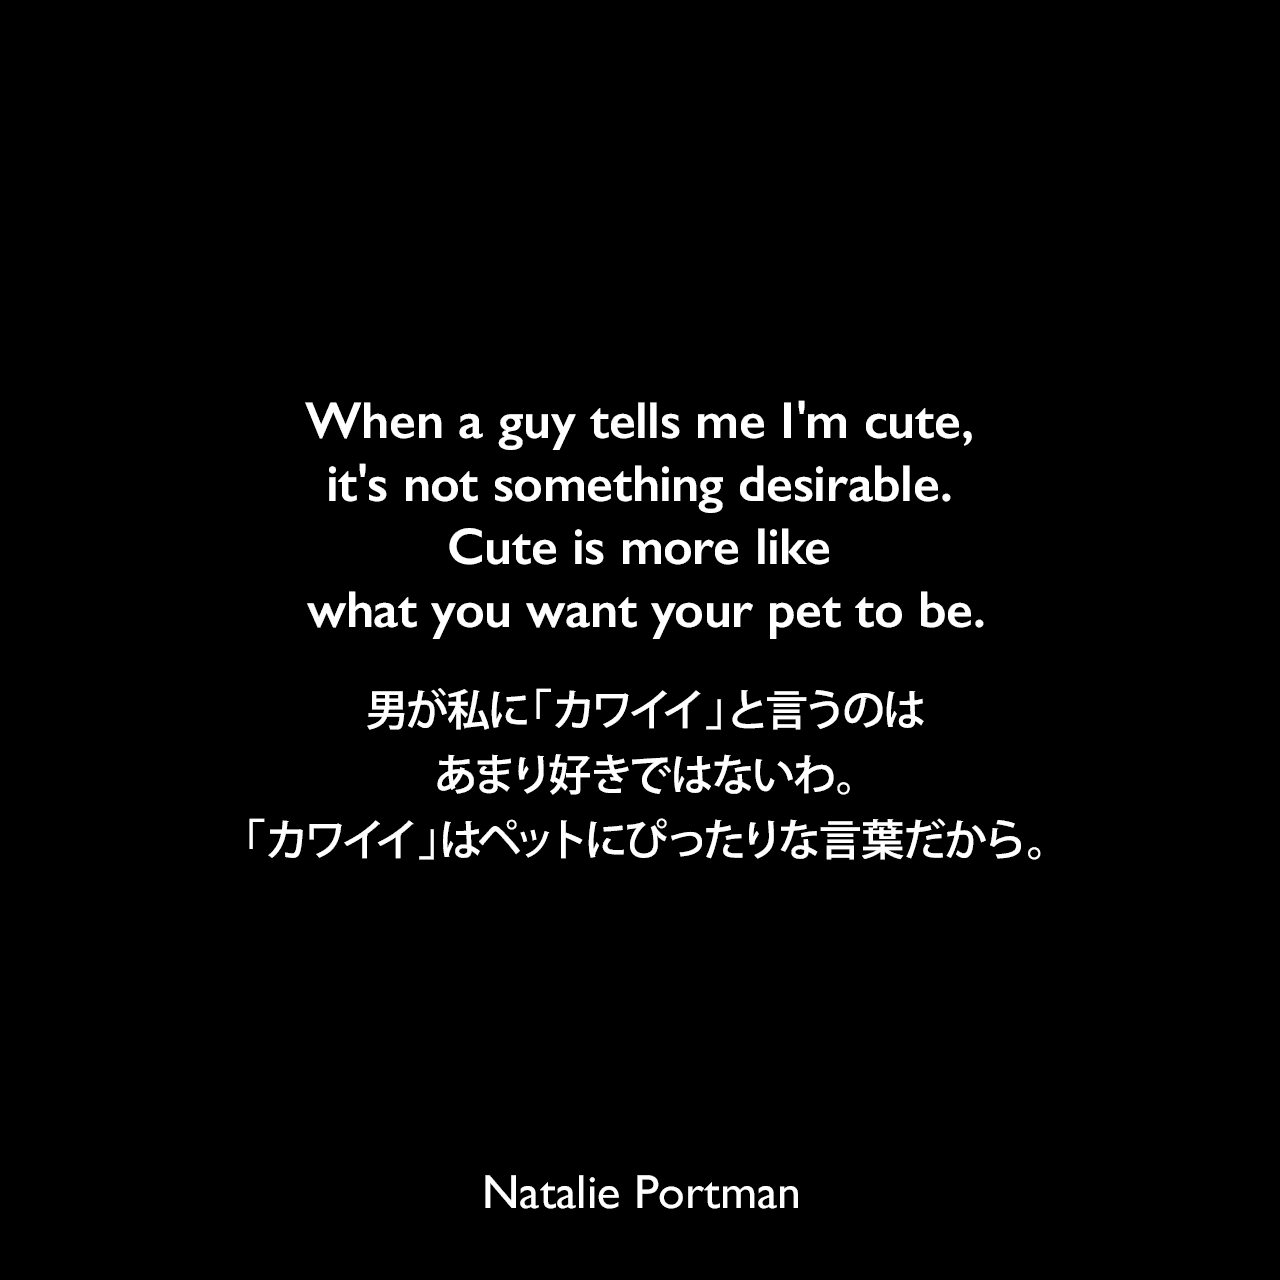 When a guy tells me I'm cute, it's not something desirable. Cute is more like what you want your pet to be.男が私に「カワイイ」と言うのは、あまり好きではないわ。「カワイイ」はペットにぴったりな言葉だから。Natalie Portman